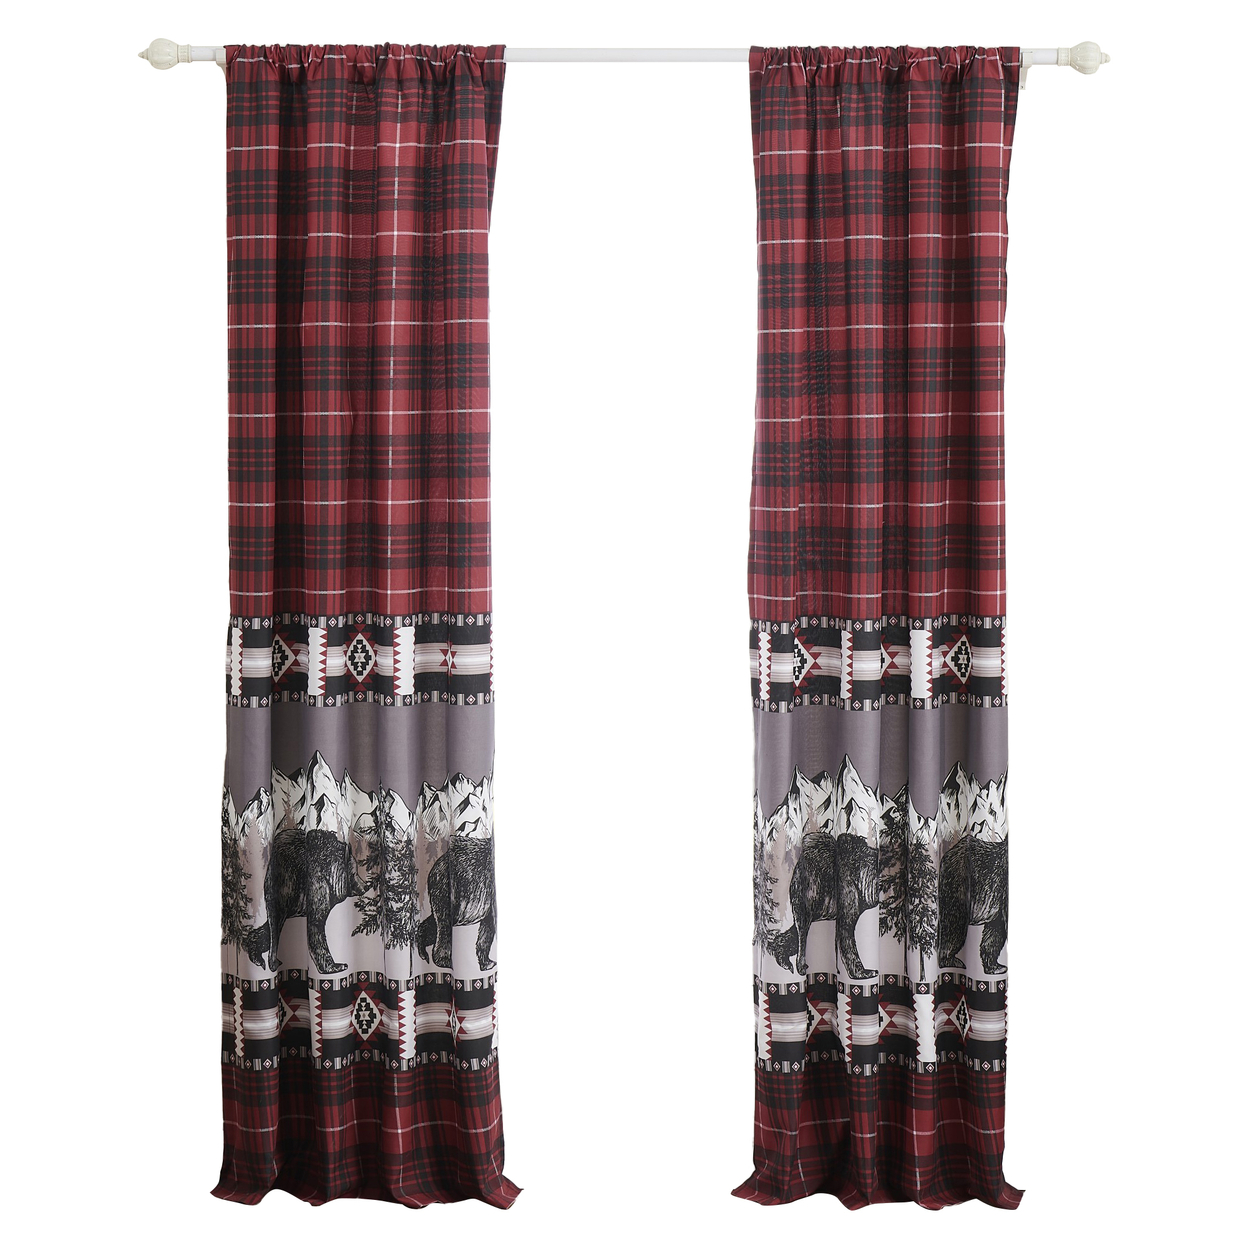 Sofia 84 Inch Bear Panel Curtains, Poly Microfiber, Red And Black Plaid